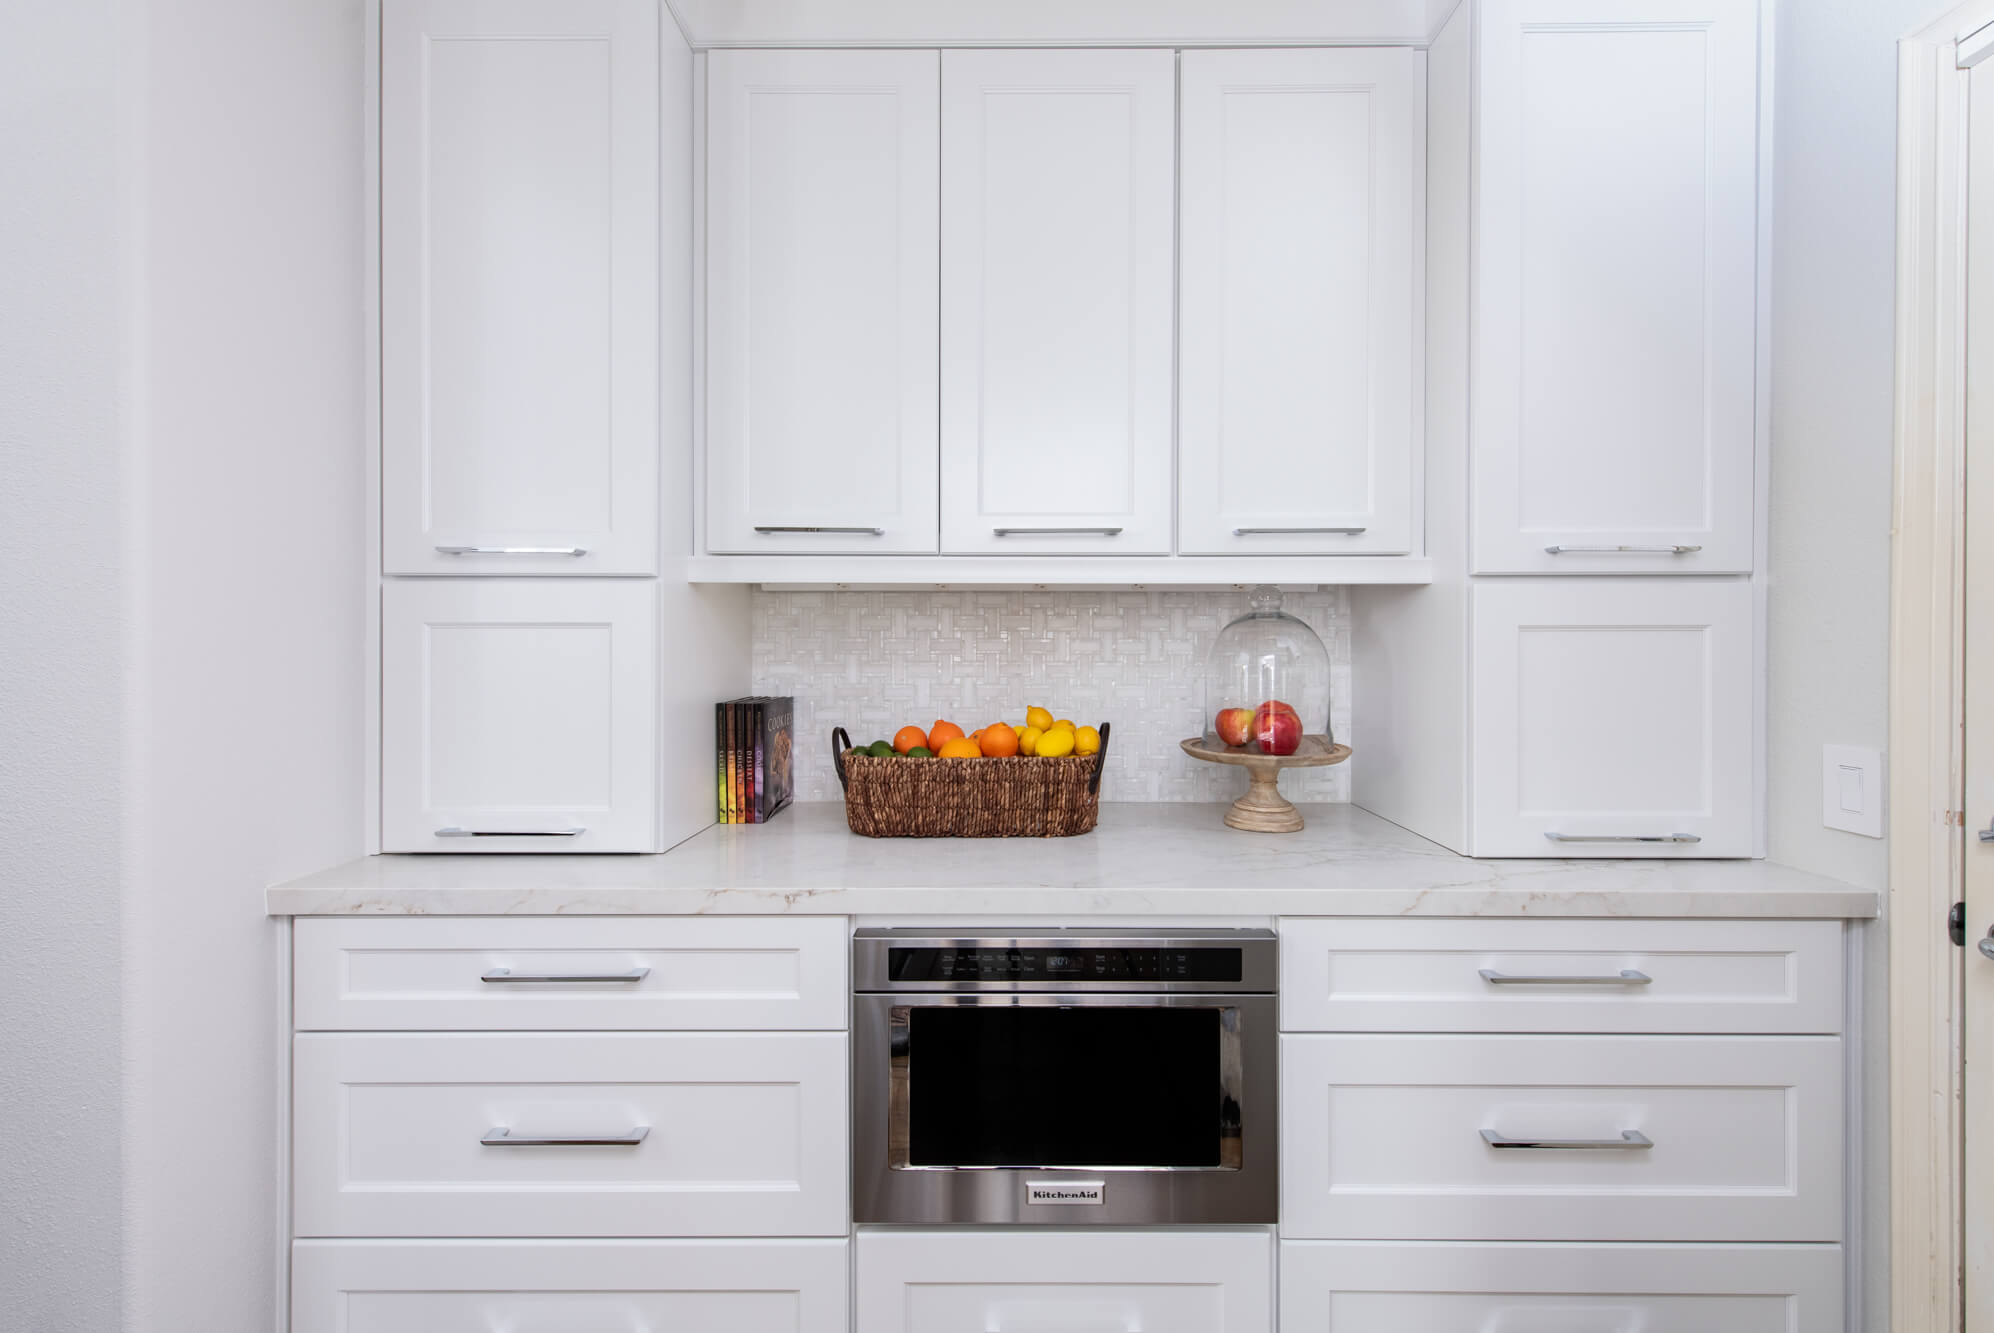 https://www.seapointe.com/wp-content/uploads/2021/05/butlers-pantry-with-cabinetry-and-marble-tile.jpg